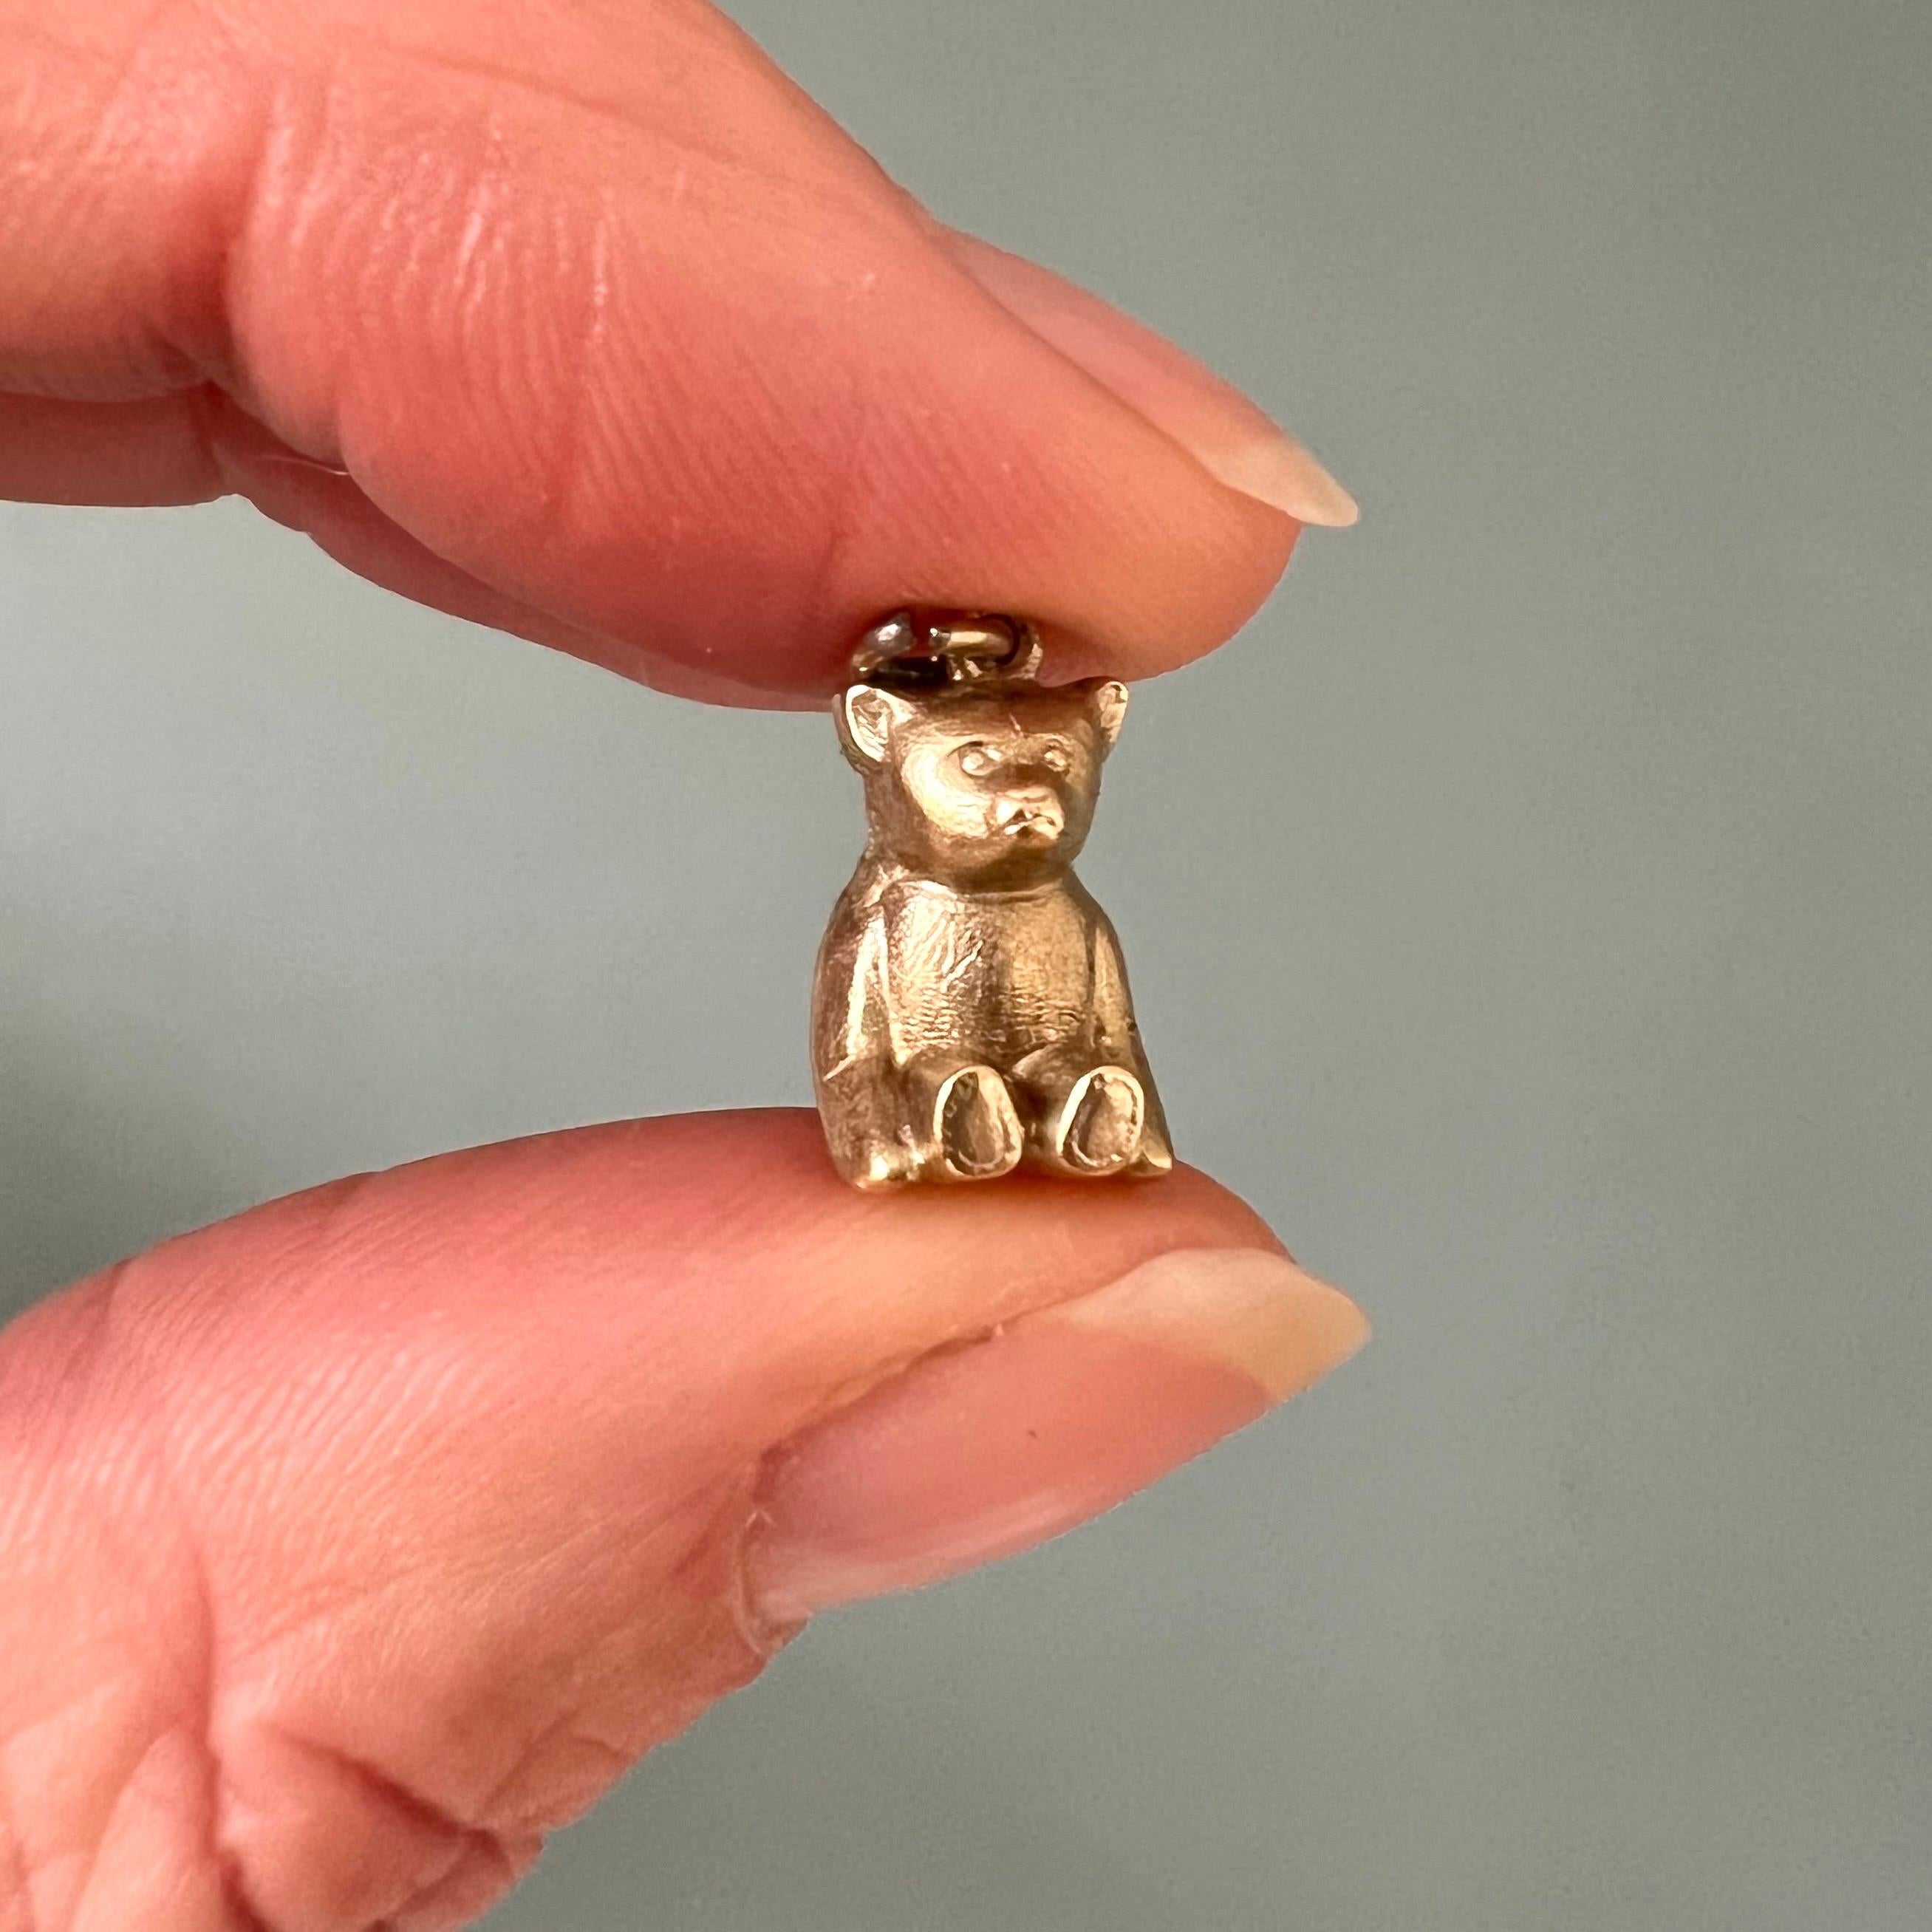 A lovely vintage 14 karat gold bear charm pendant. The charm is nicely modeled into a sweet little bear who is sitting with its paws resting next to the body. The design of the bear has a gold matte satin finish throughout his body. Will you take